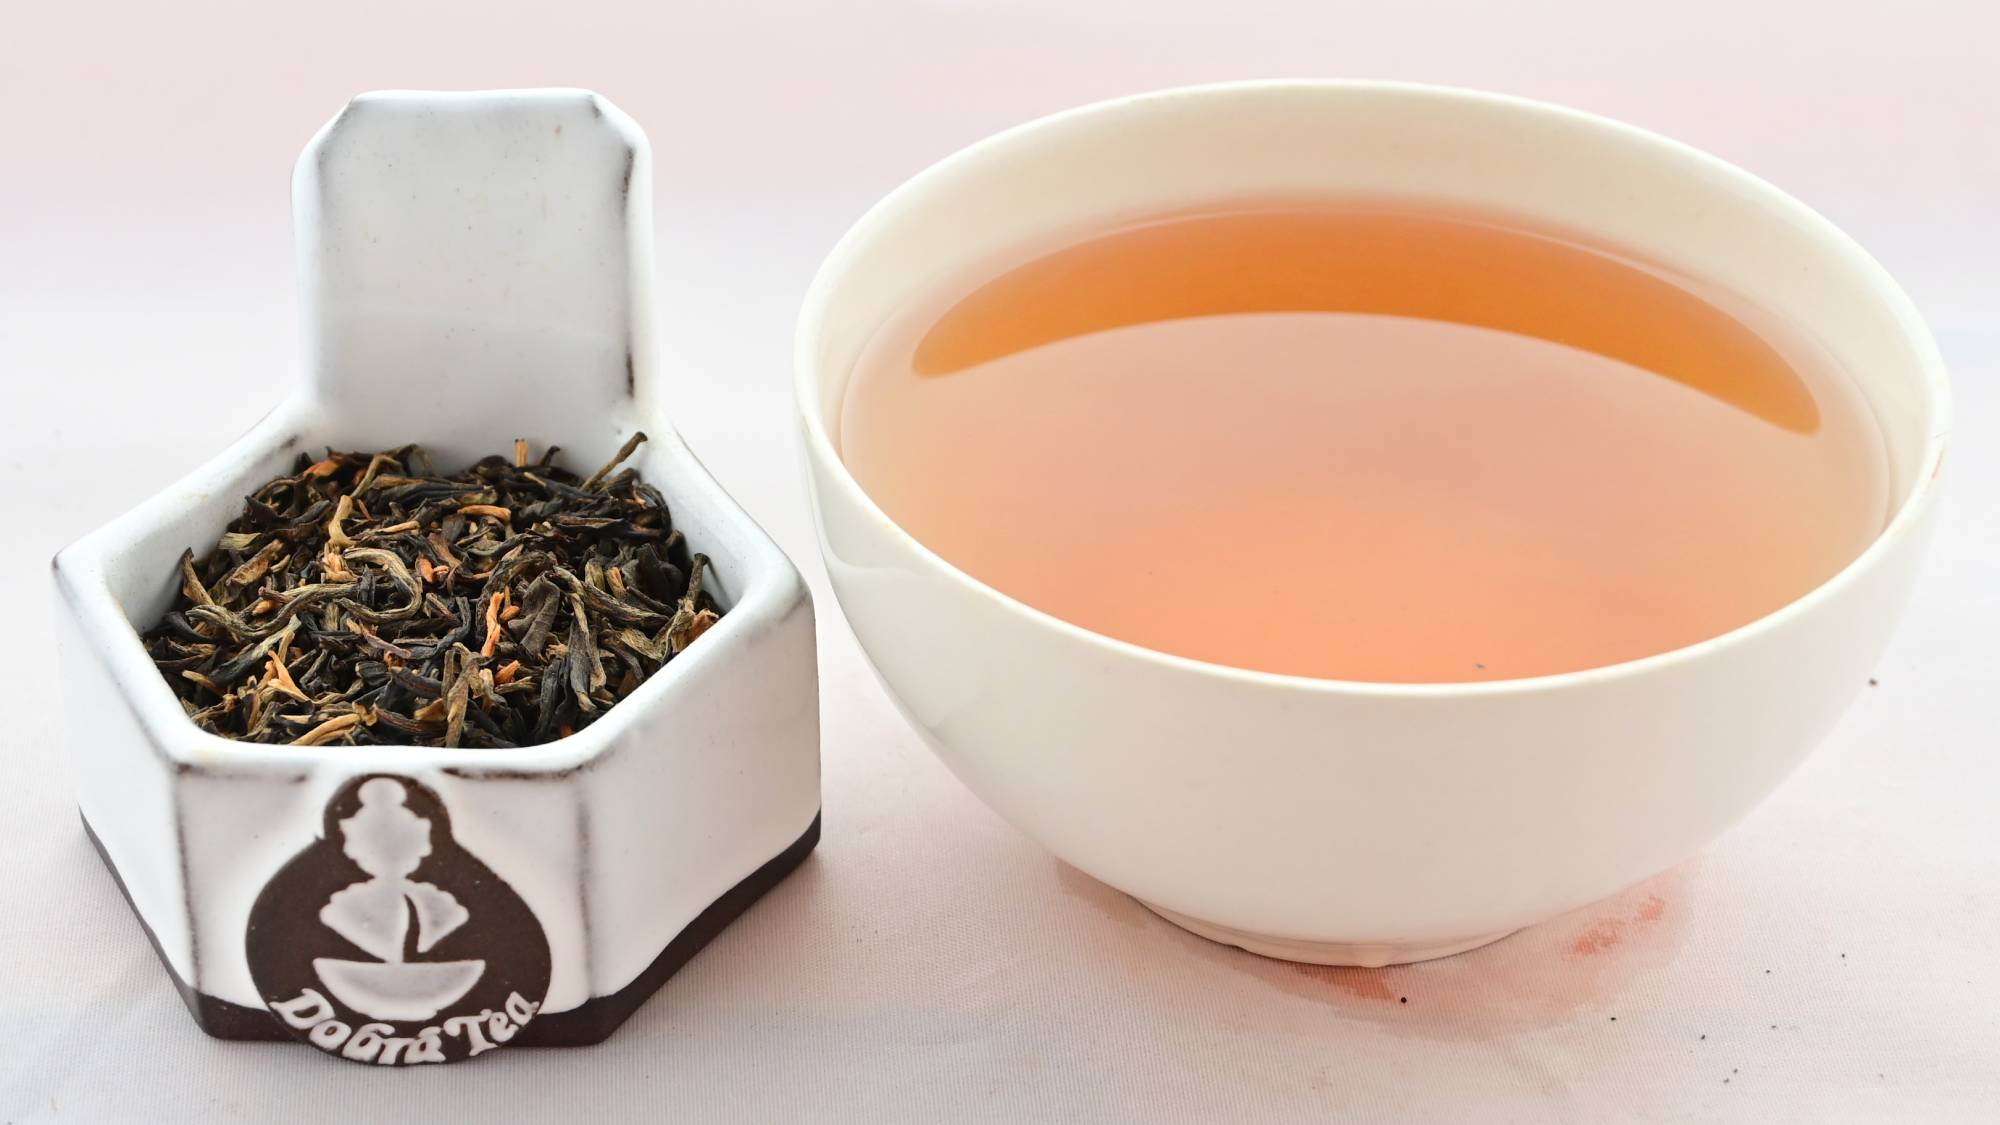 A side-by-side comparison of Dian Hong leaves and steeped tea. On the left, the leaves are small and range from light brown to dark brown in color. On the right, the steeped tea is a rich orange.